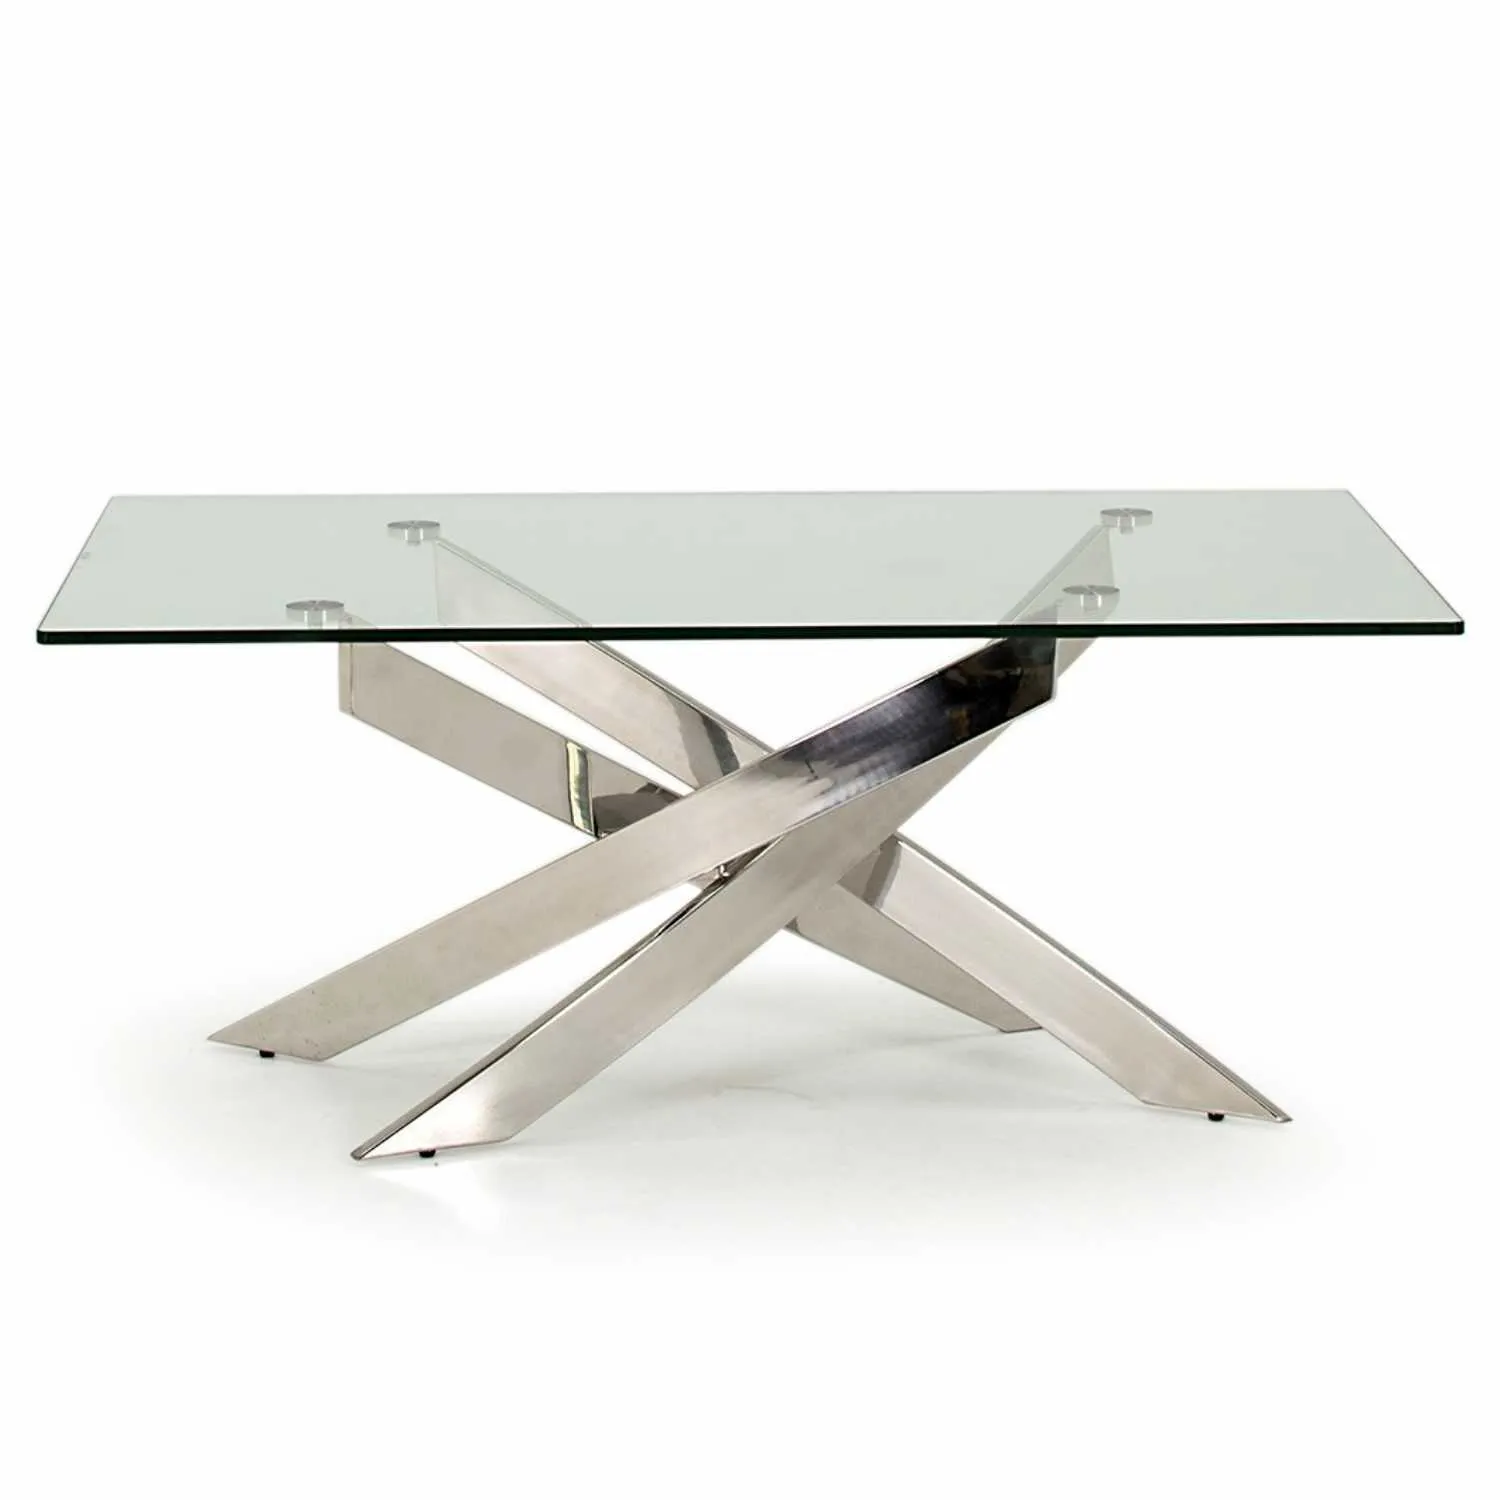 Clear Glass Coffee Table Polished Stainless Steel x Cross Base